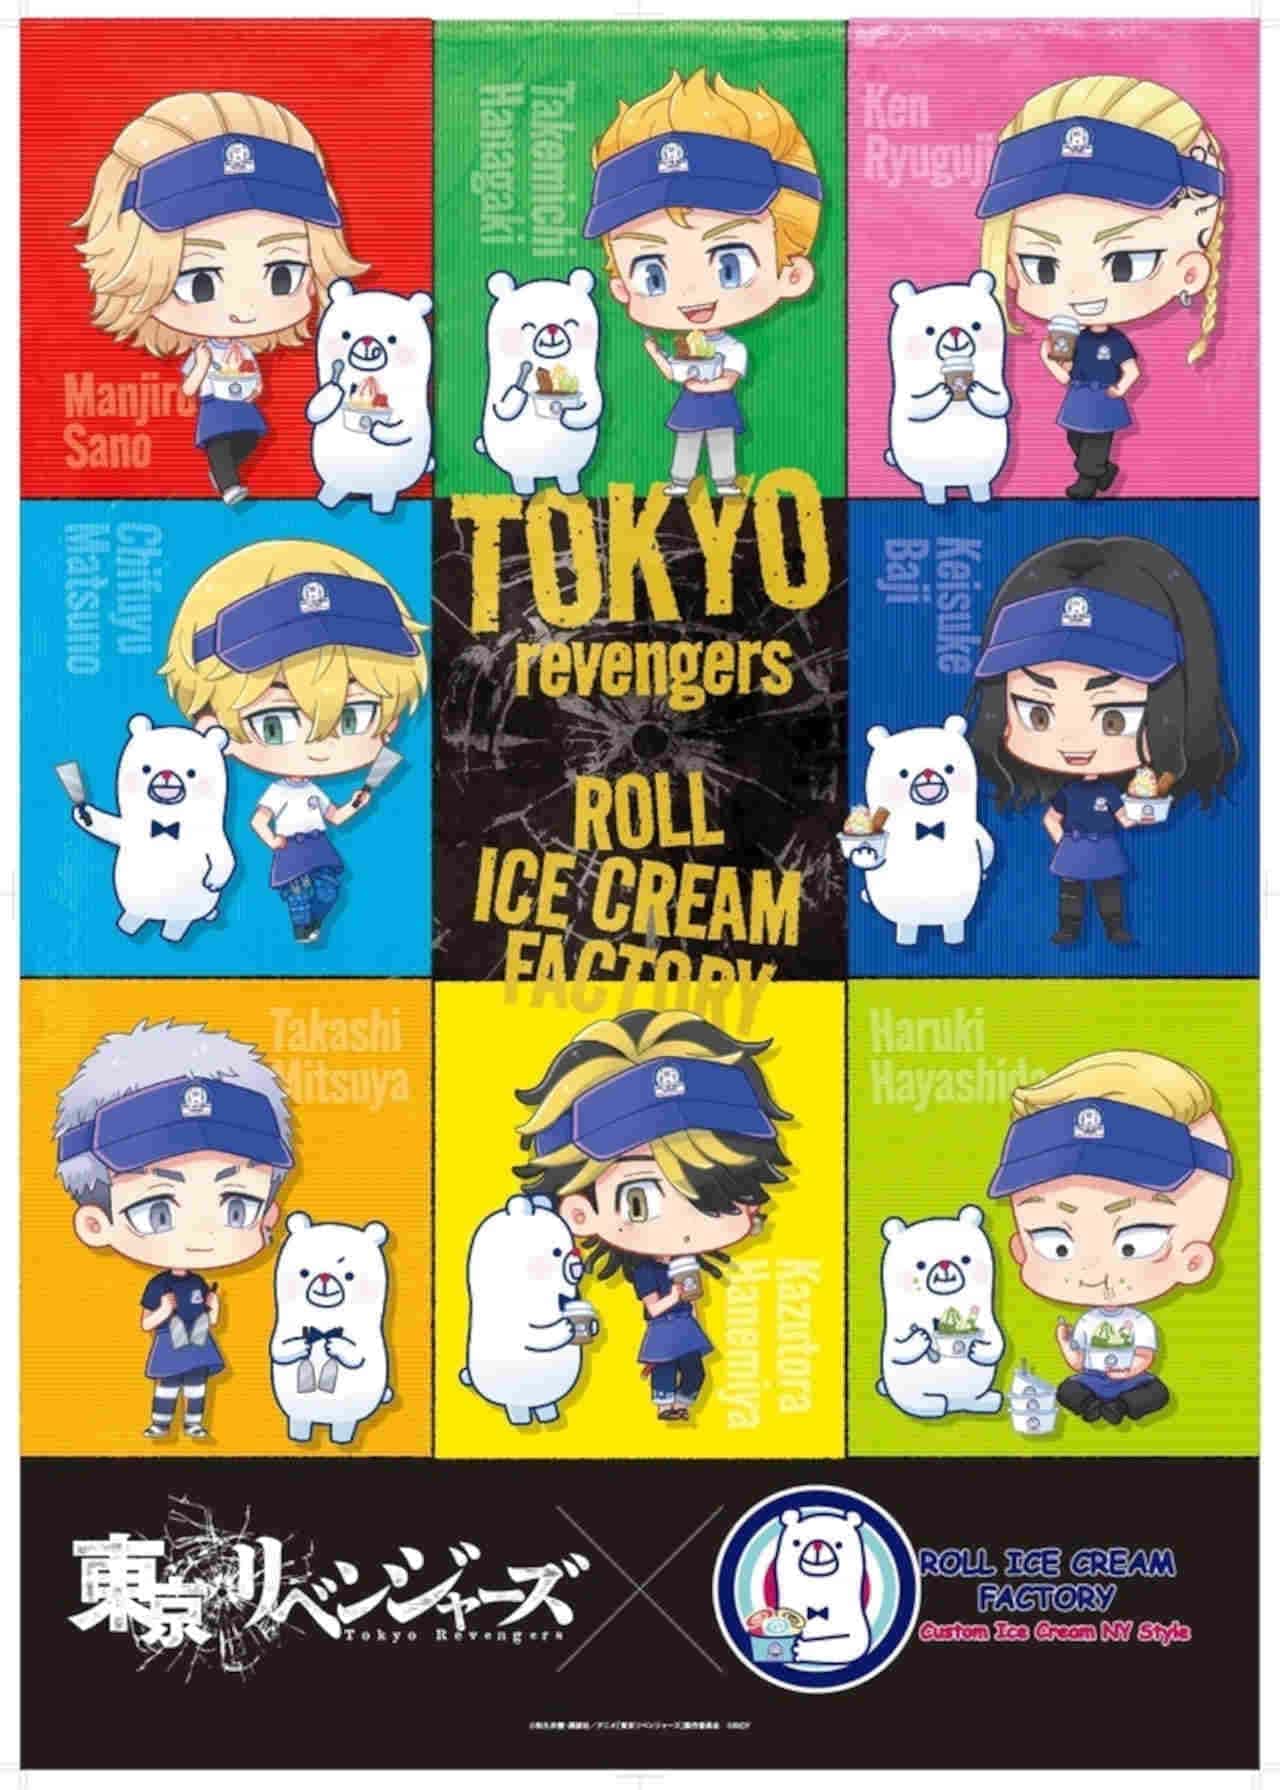 Roll Ice Cream Factory "Tokyo Revengers" collaboration